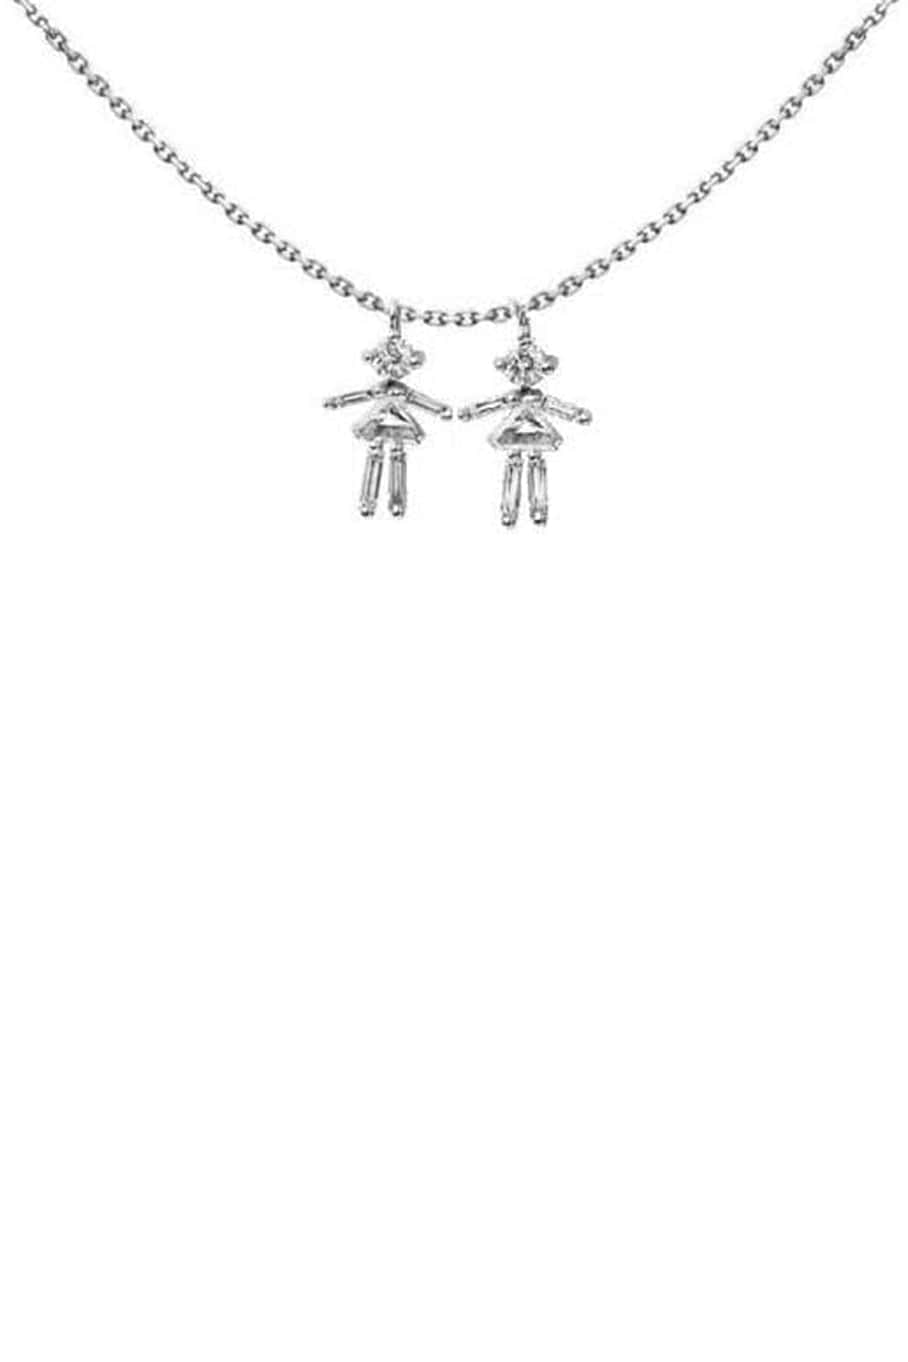 Baguette Diamond White Gold Girl Necklace JEWELRYFINE JEWELNECKLACE O LITTLE ONES   